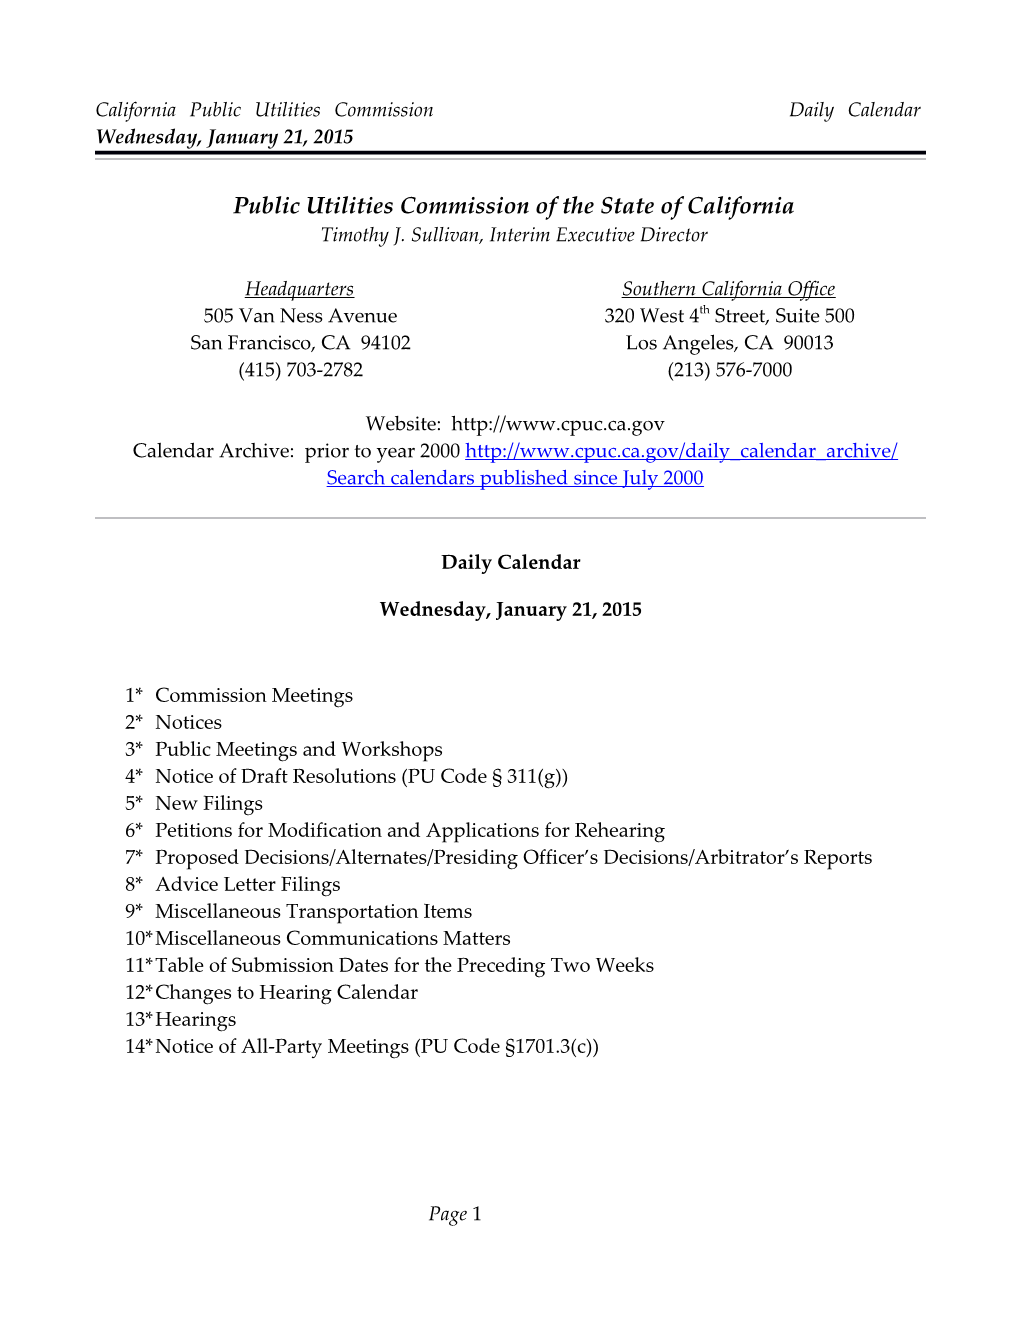 California Public Utilities Commission Daily Calendar Wednesday, January 21, 2015